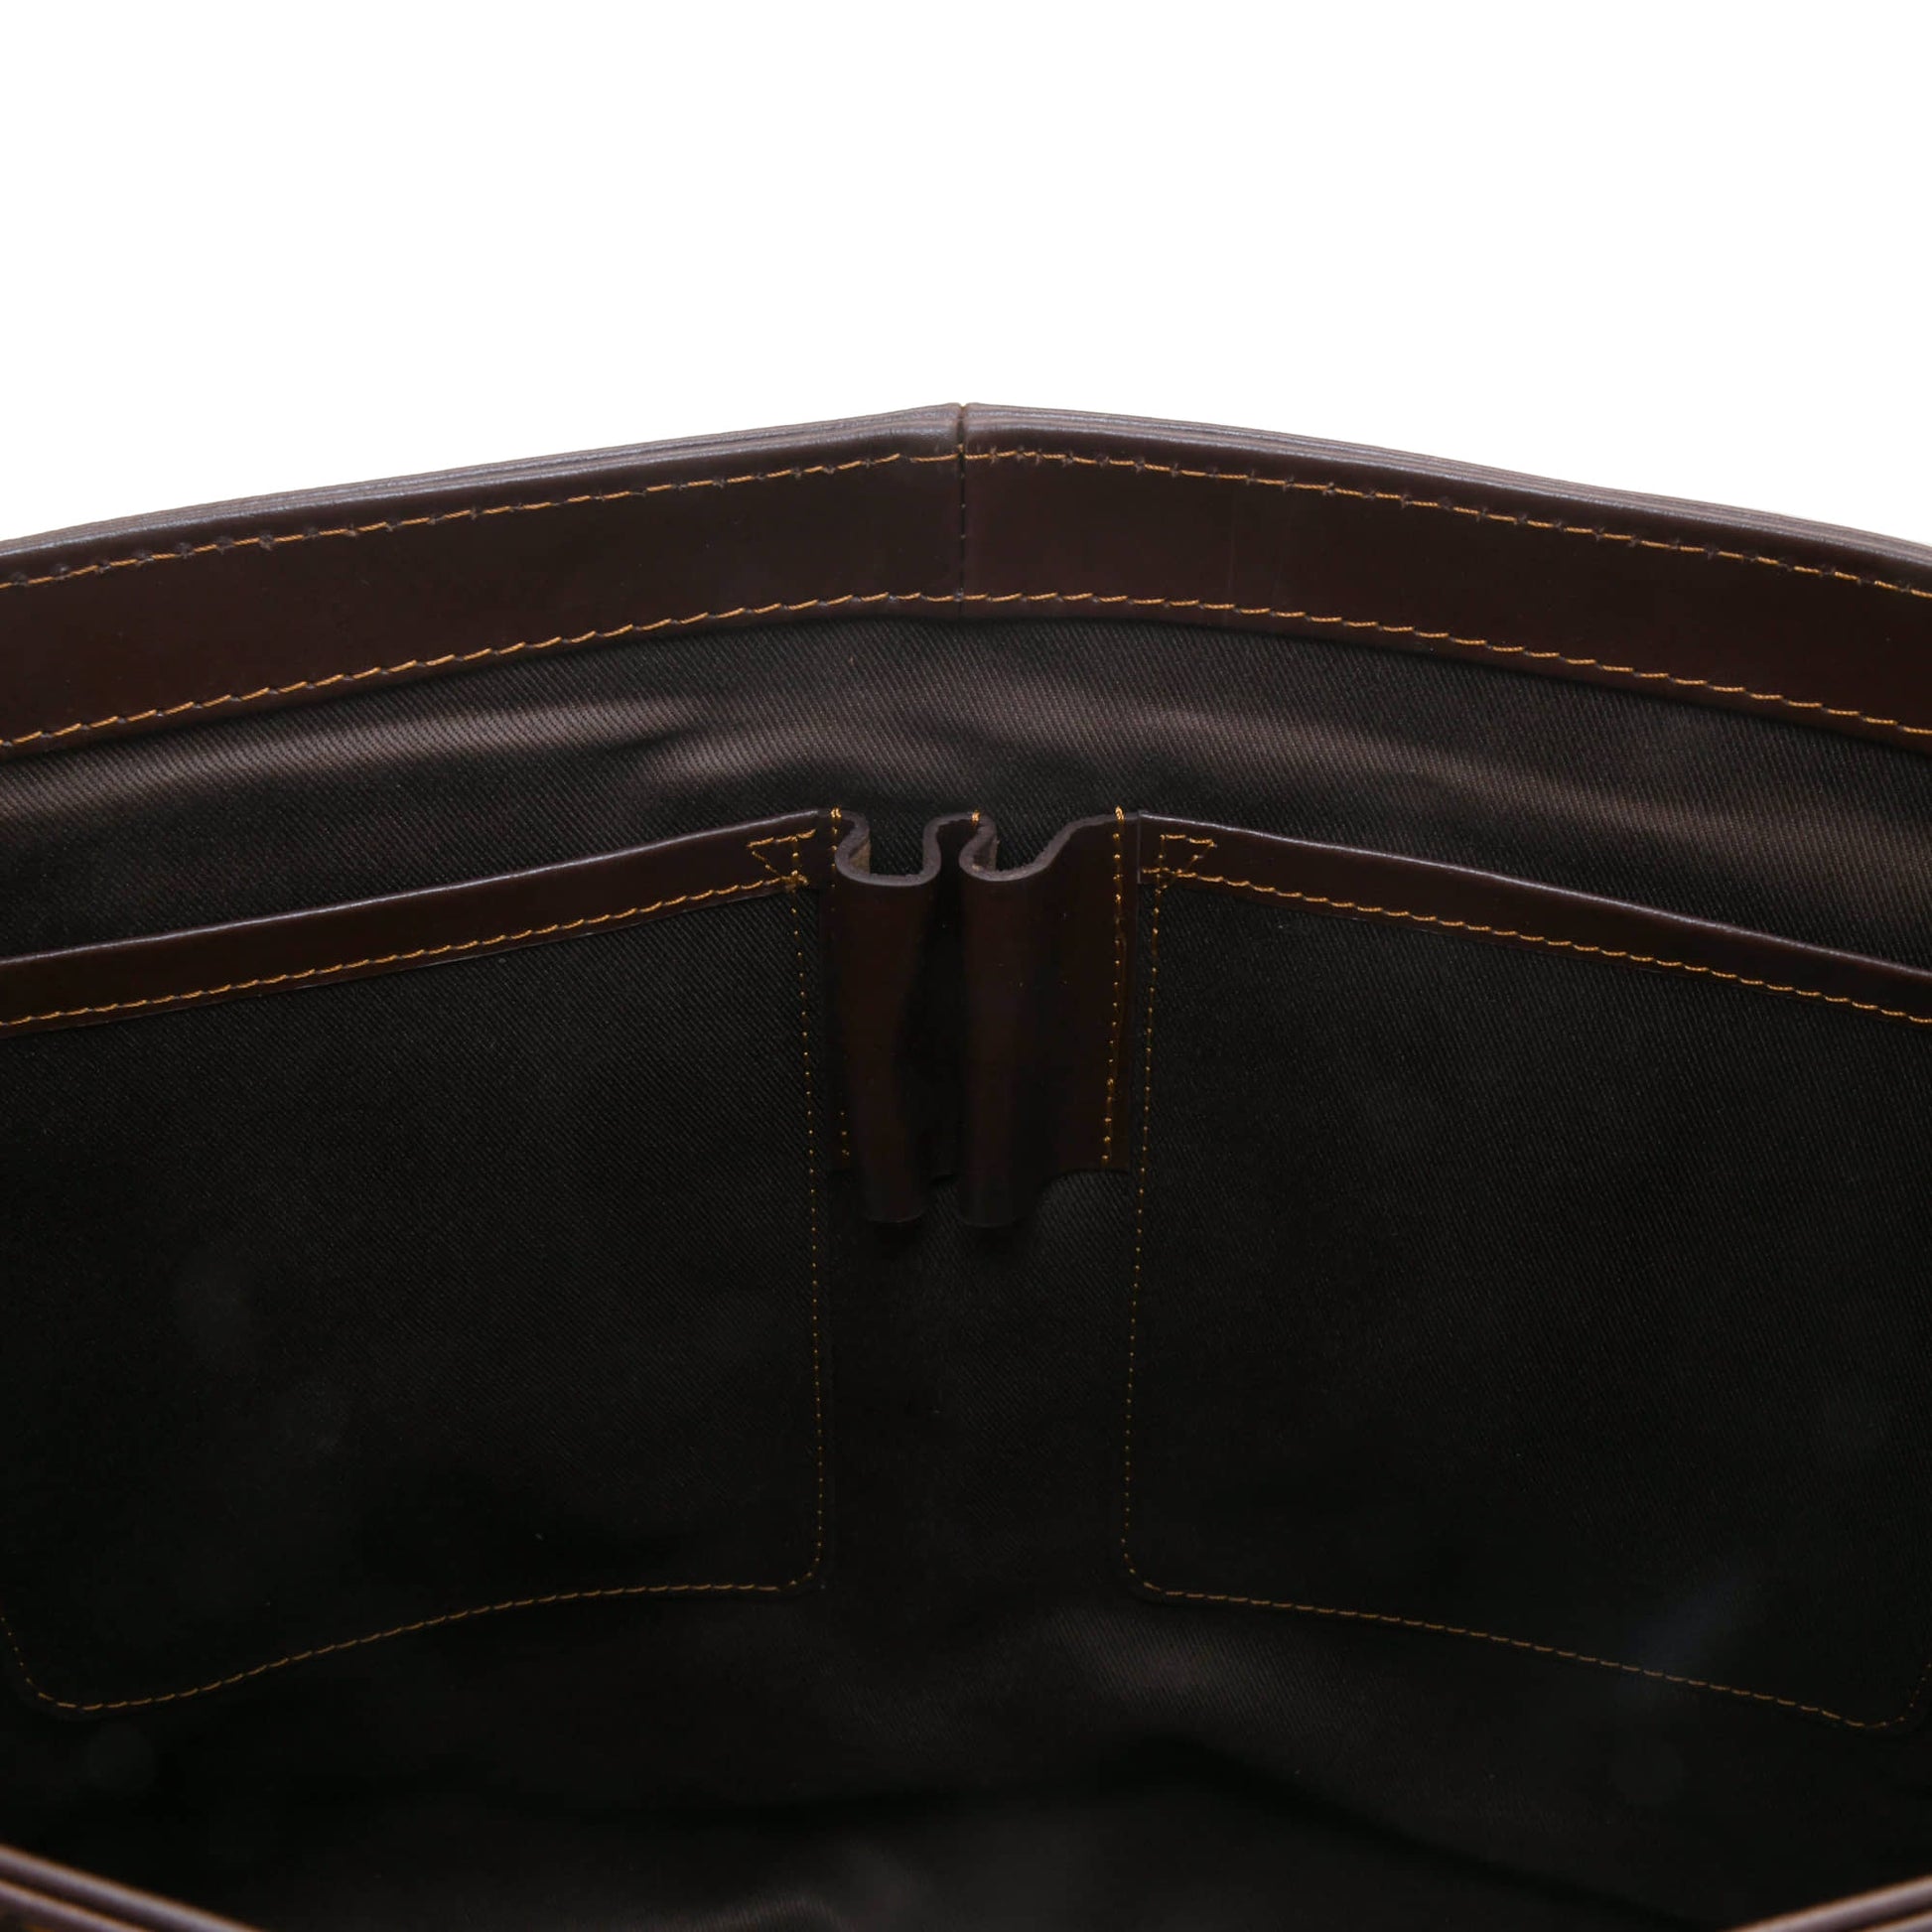 Style n Craft 392005 Messenger Bag in Full Grain Dark Brown Leather - Inside Front Wall View showing the open pockets and pen/pencil holders